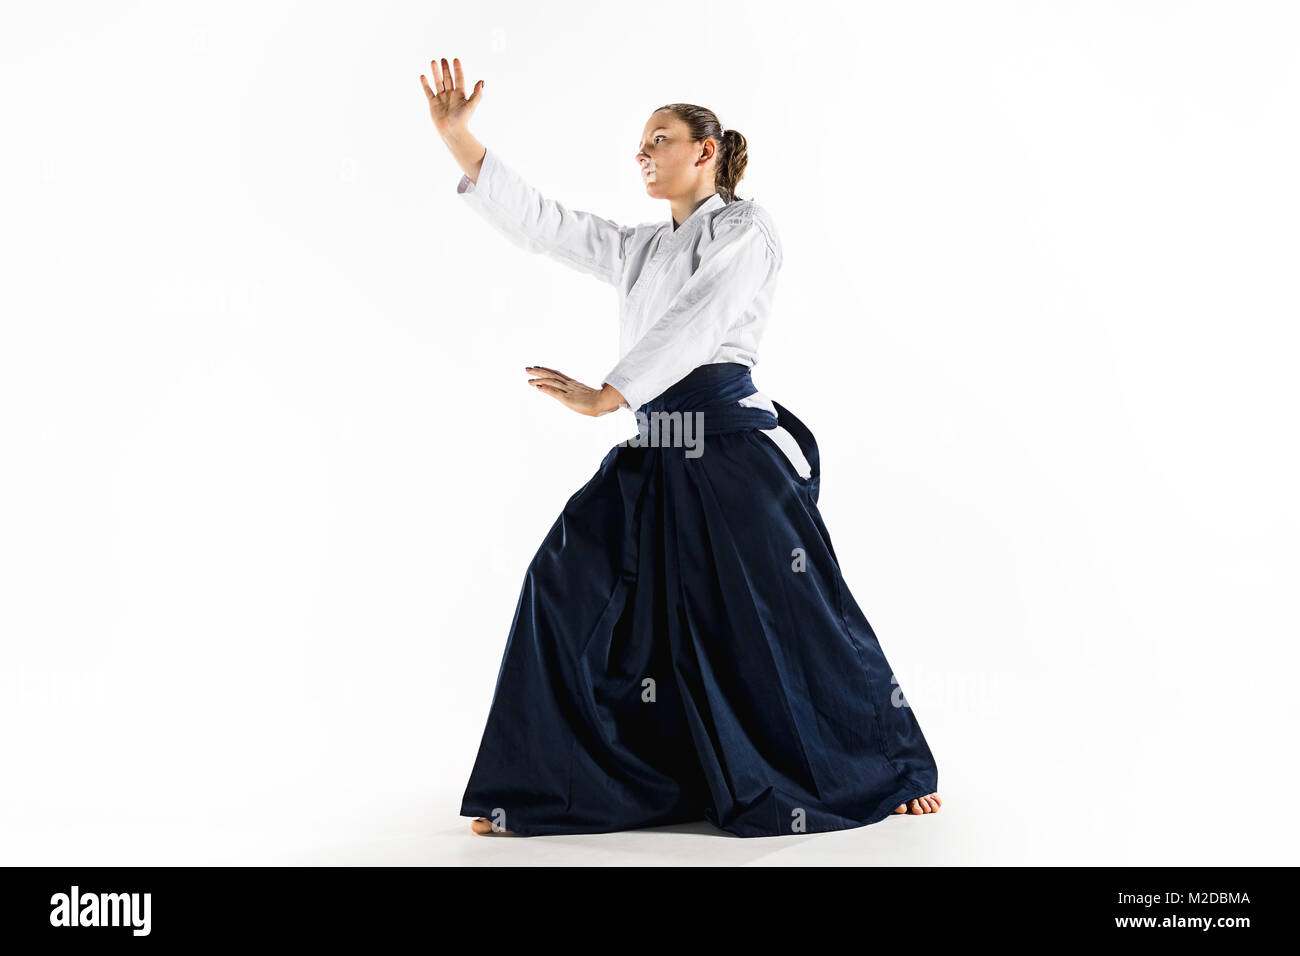 Aikido master practices defense posture. Healthy lifestyle and sports  concept. Woman in white kimono on white background Stock Photo - Alamy